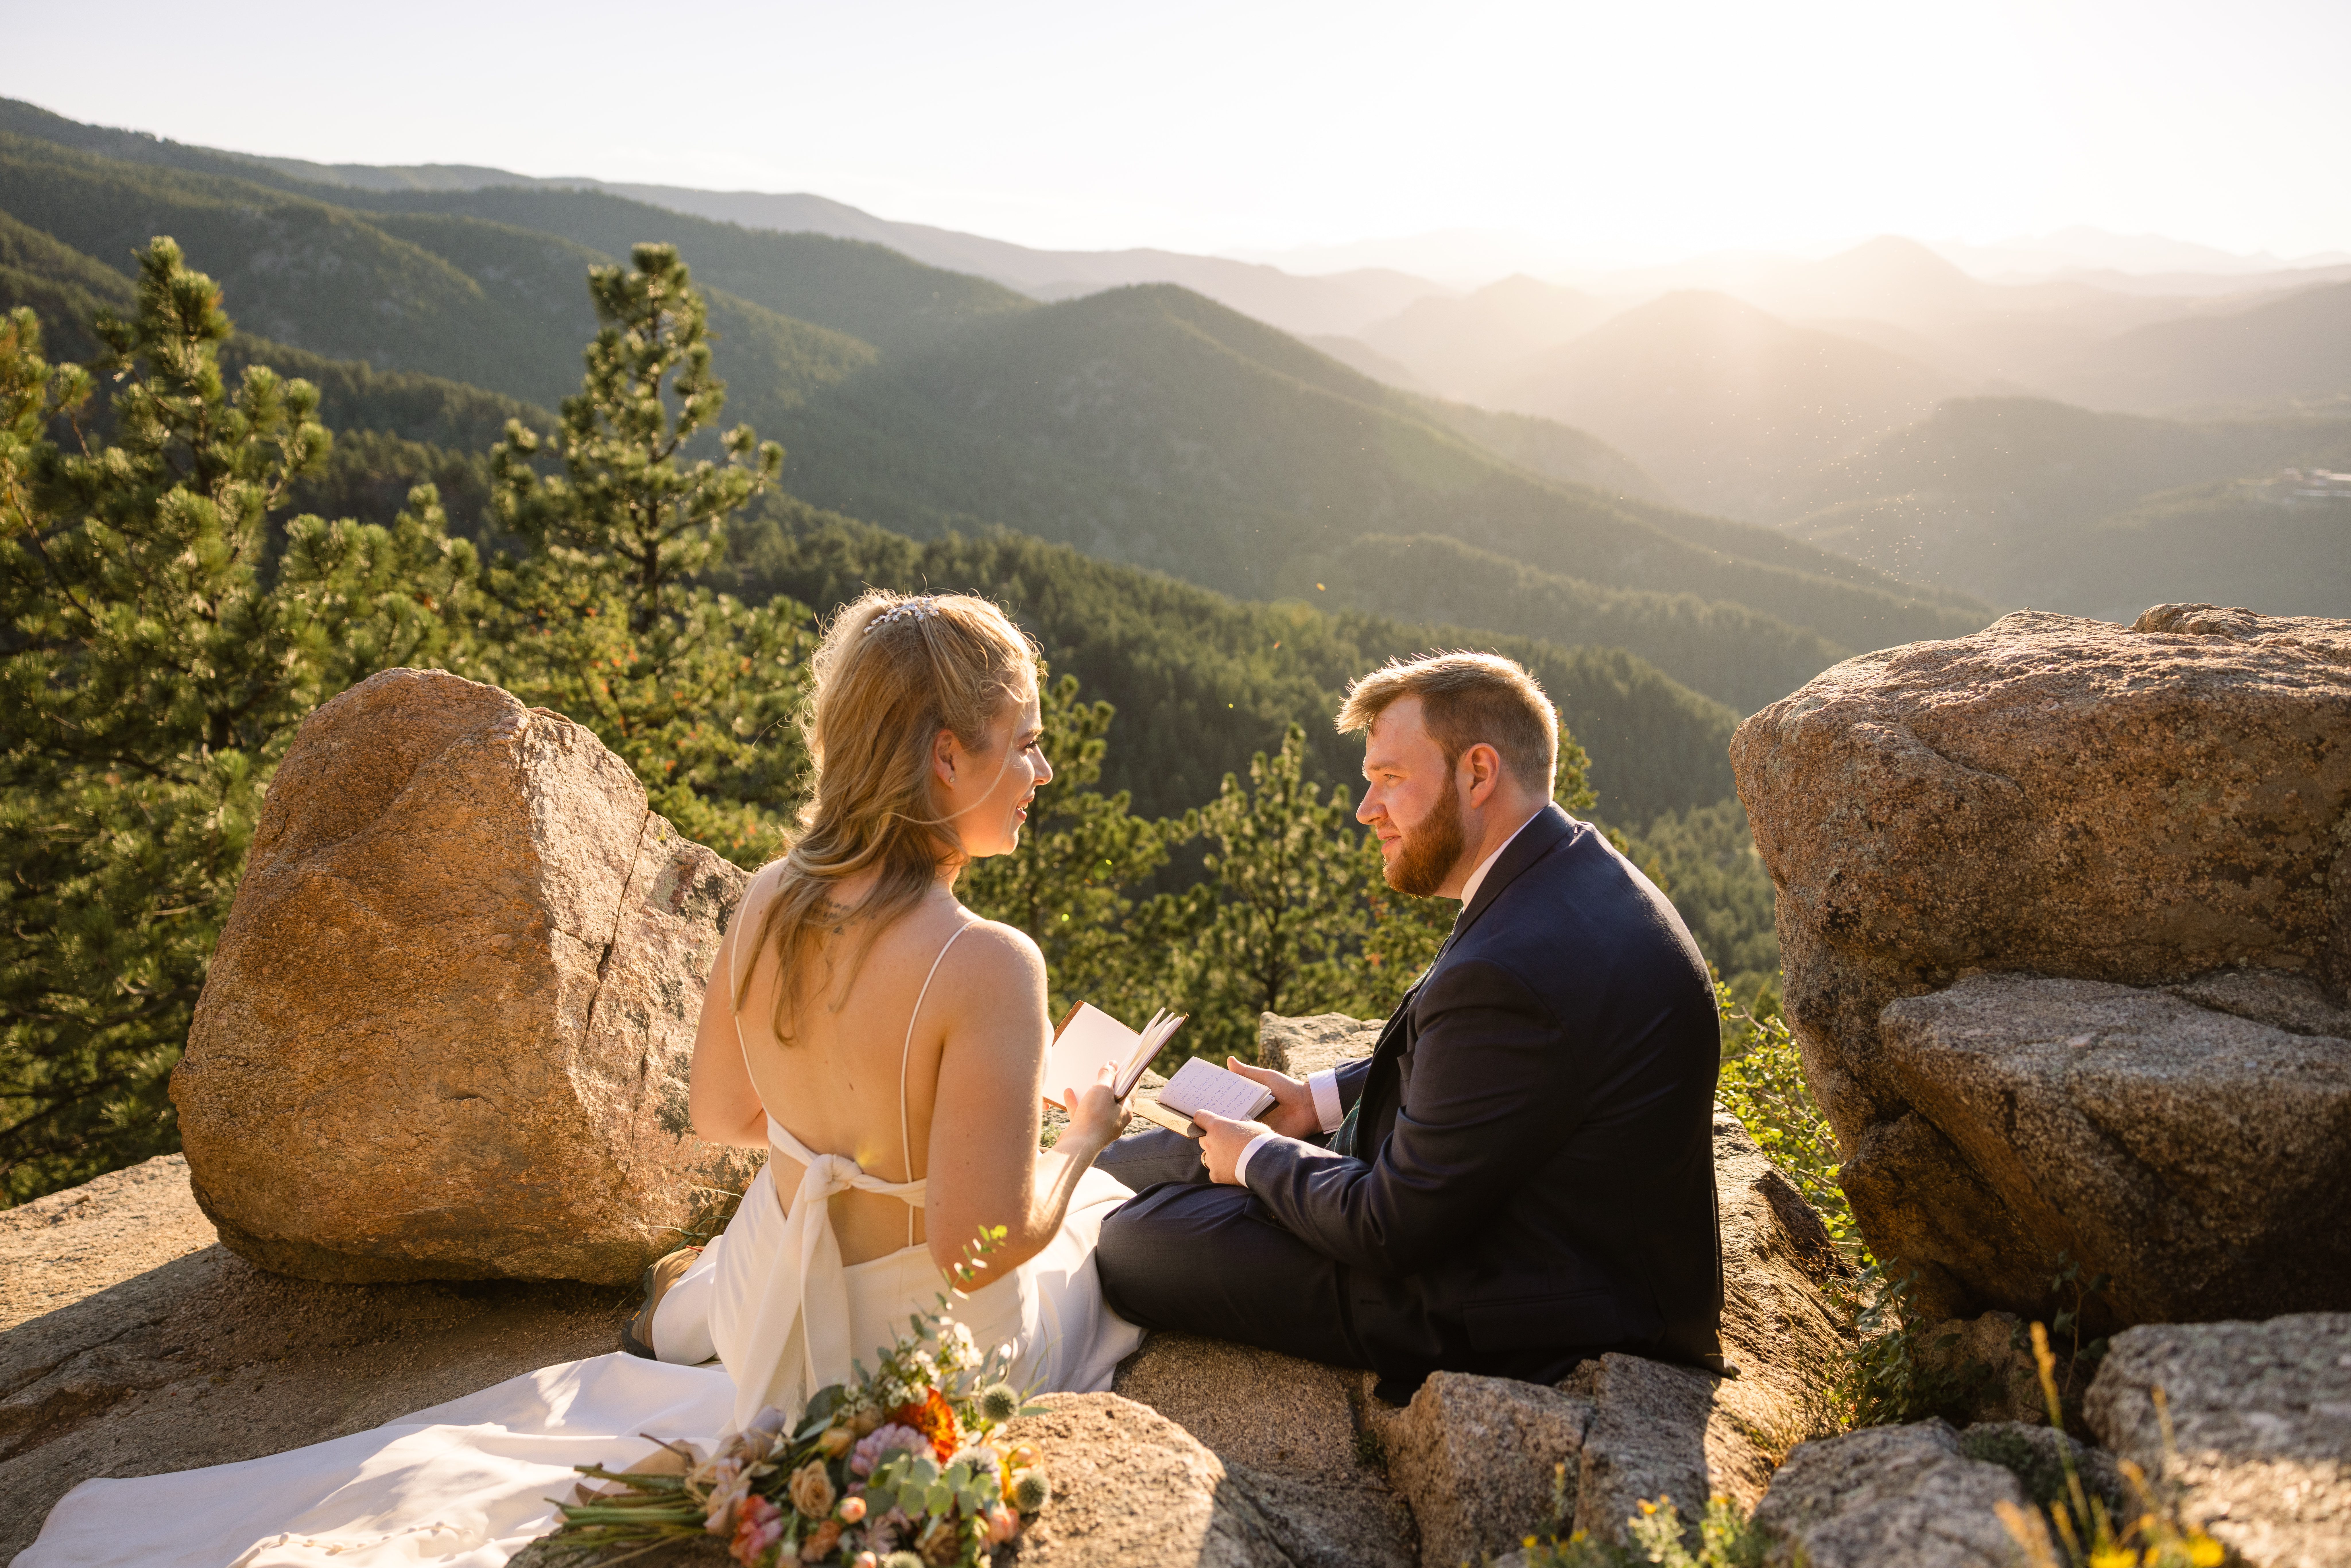 The bride and groom looking at each other during a moment on the mountain after their Sunrise Amphitheater wedding.